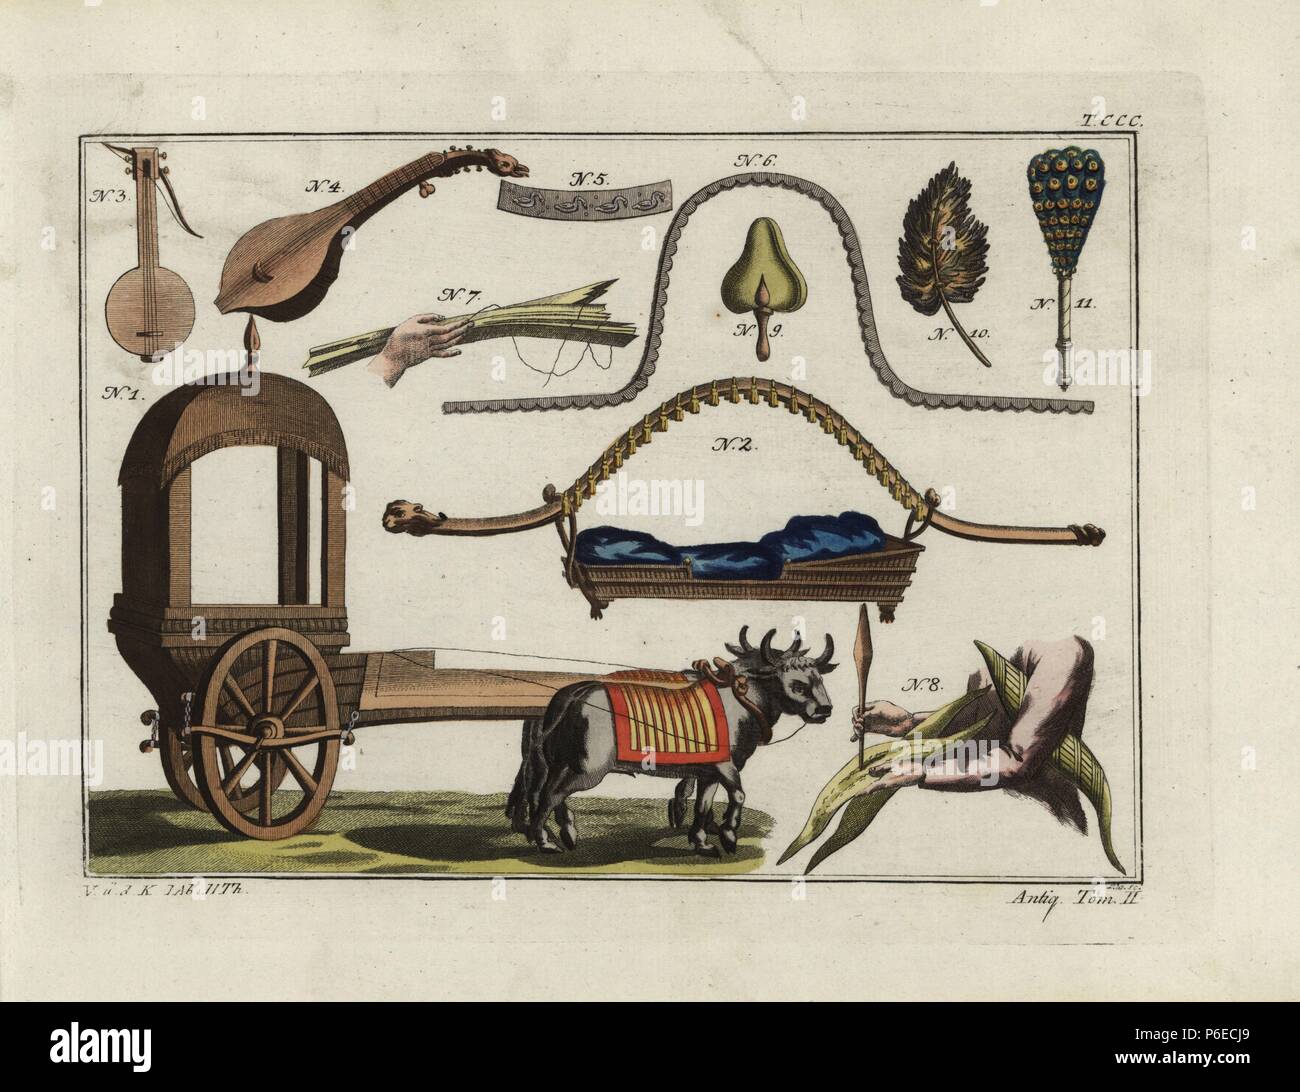 Indian cart, palanquin, musical instrument, books, fans, and palace ornaments. Handcoloured copperplate engraving by Paul Weindl from Robert von Spalart's 'Historical Picture of the Costumes of the Principal People of Antiquity and of the Middle Ages,' Chez Collignon, Metz, 1810. Stock Photo